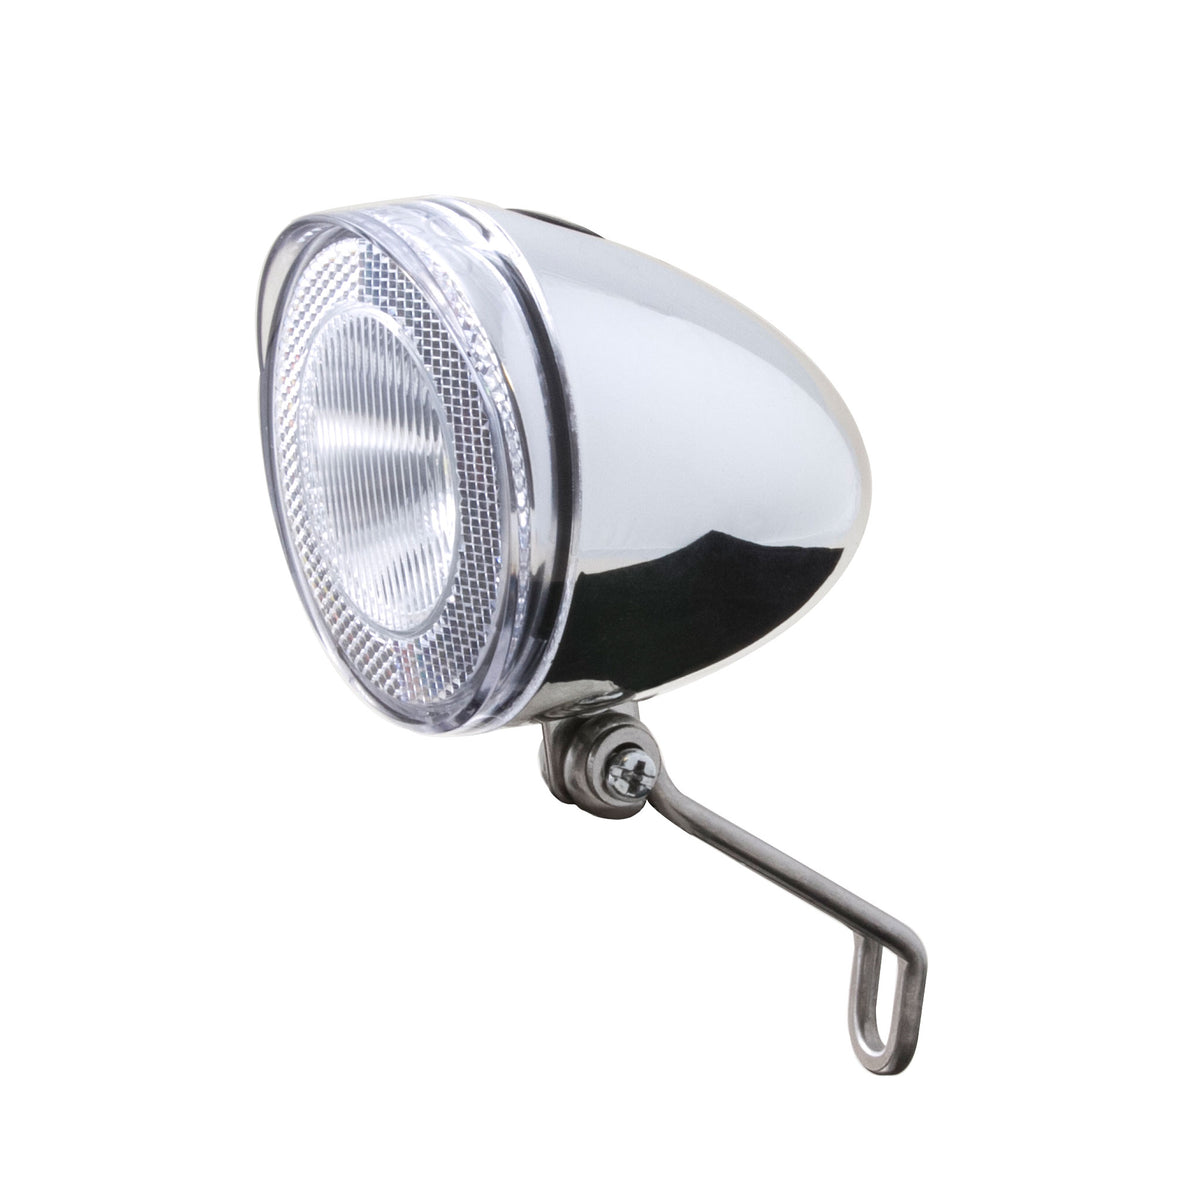 Silver streamlined bullet bicycle head lamp with reflector.